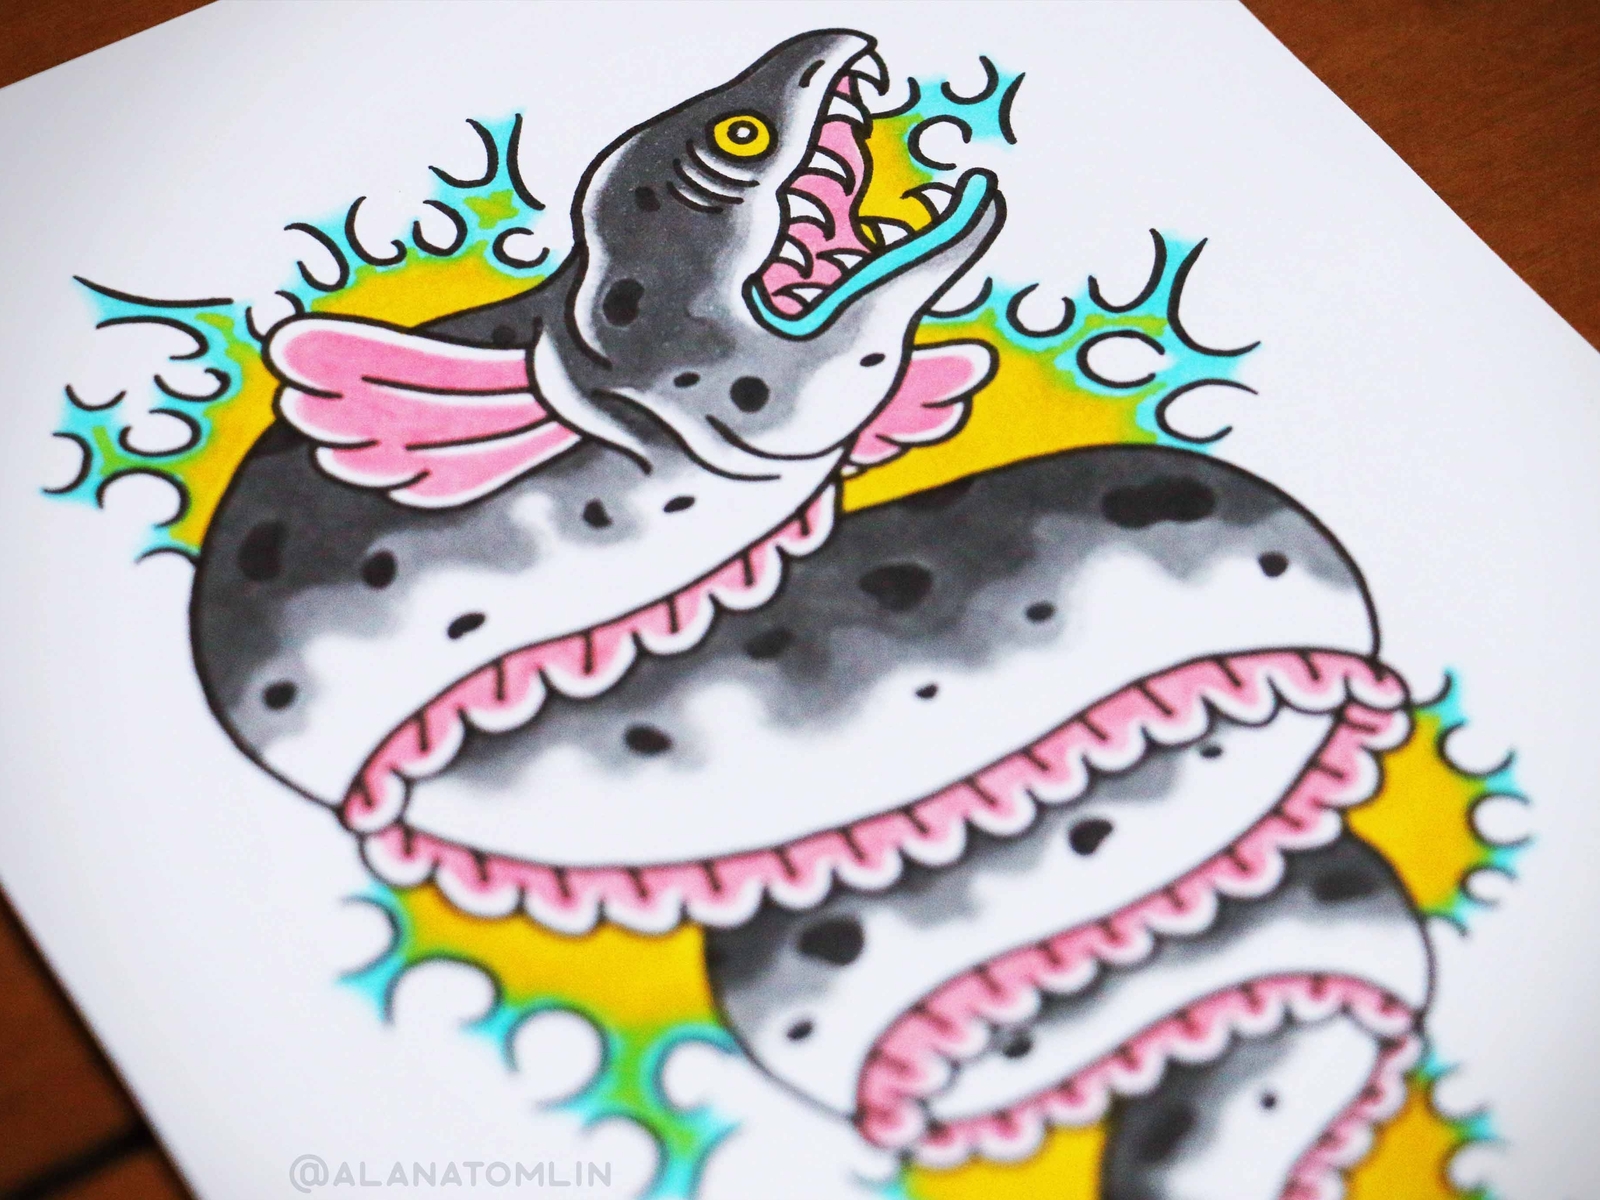 Electric eel from today  Tattoo test Taboo tattoo Traditional tattoo  flash